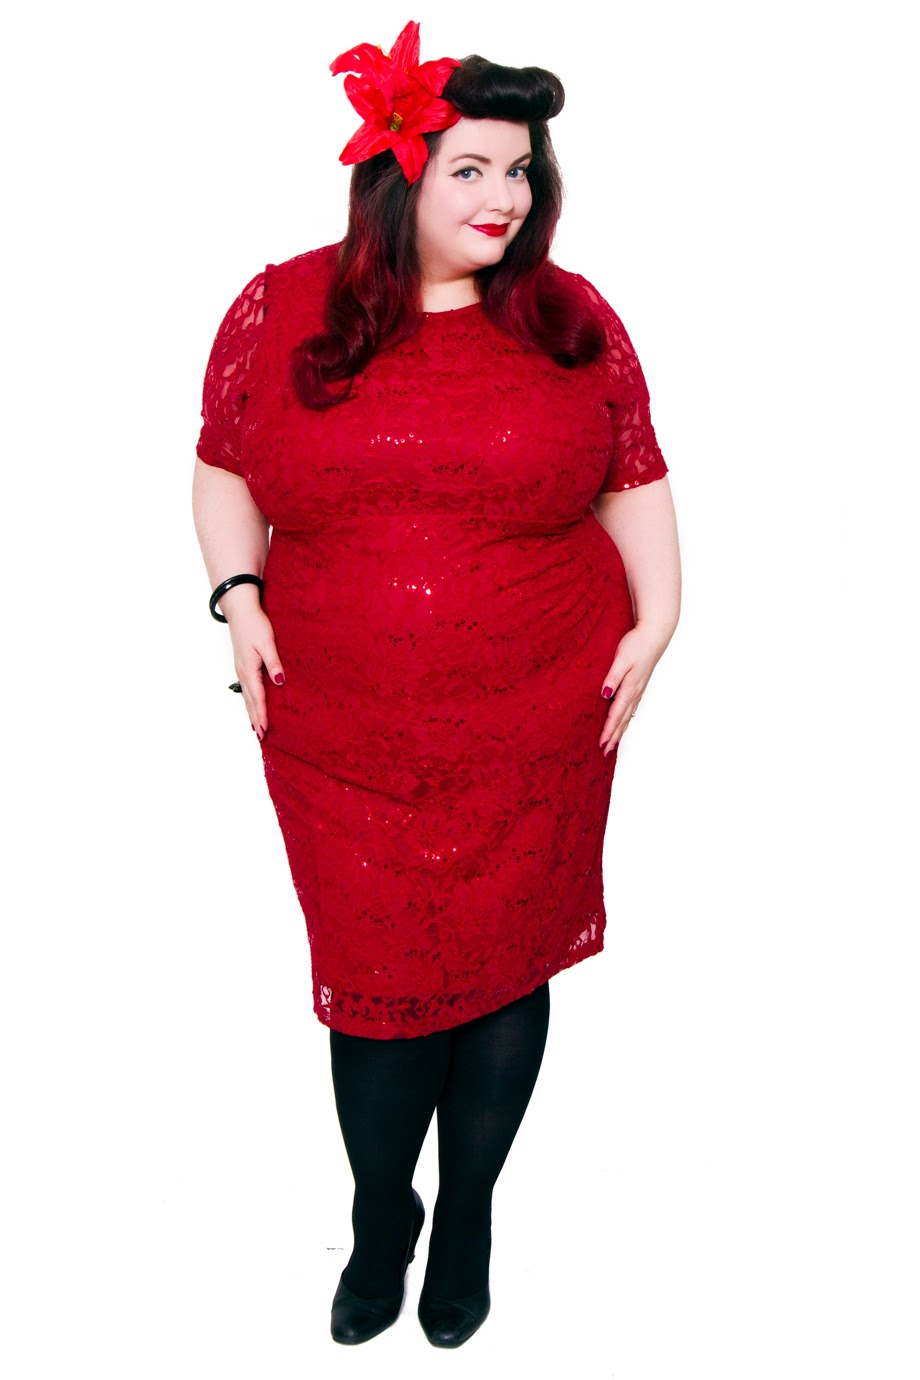 Where The Wild Roses Grow - Feeling Festive in a David Emanuel All Over  Lace And Sequin Dress from Bonmarché